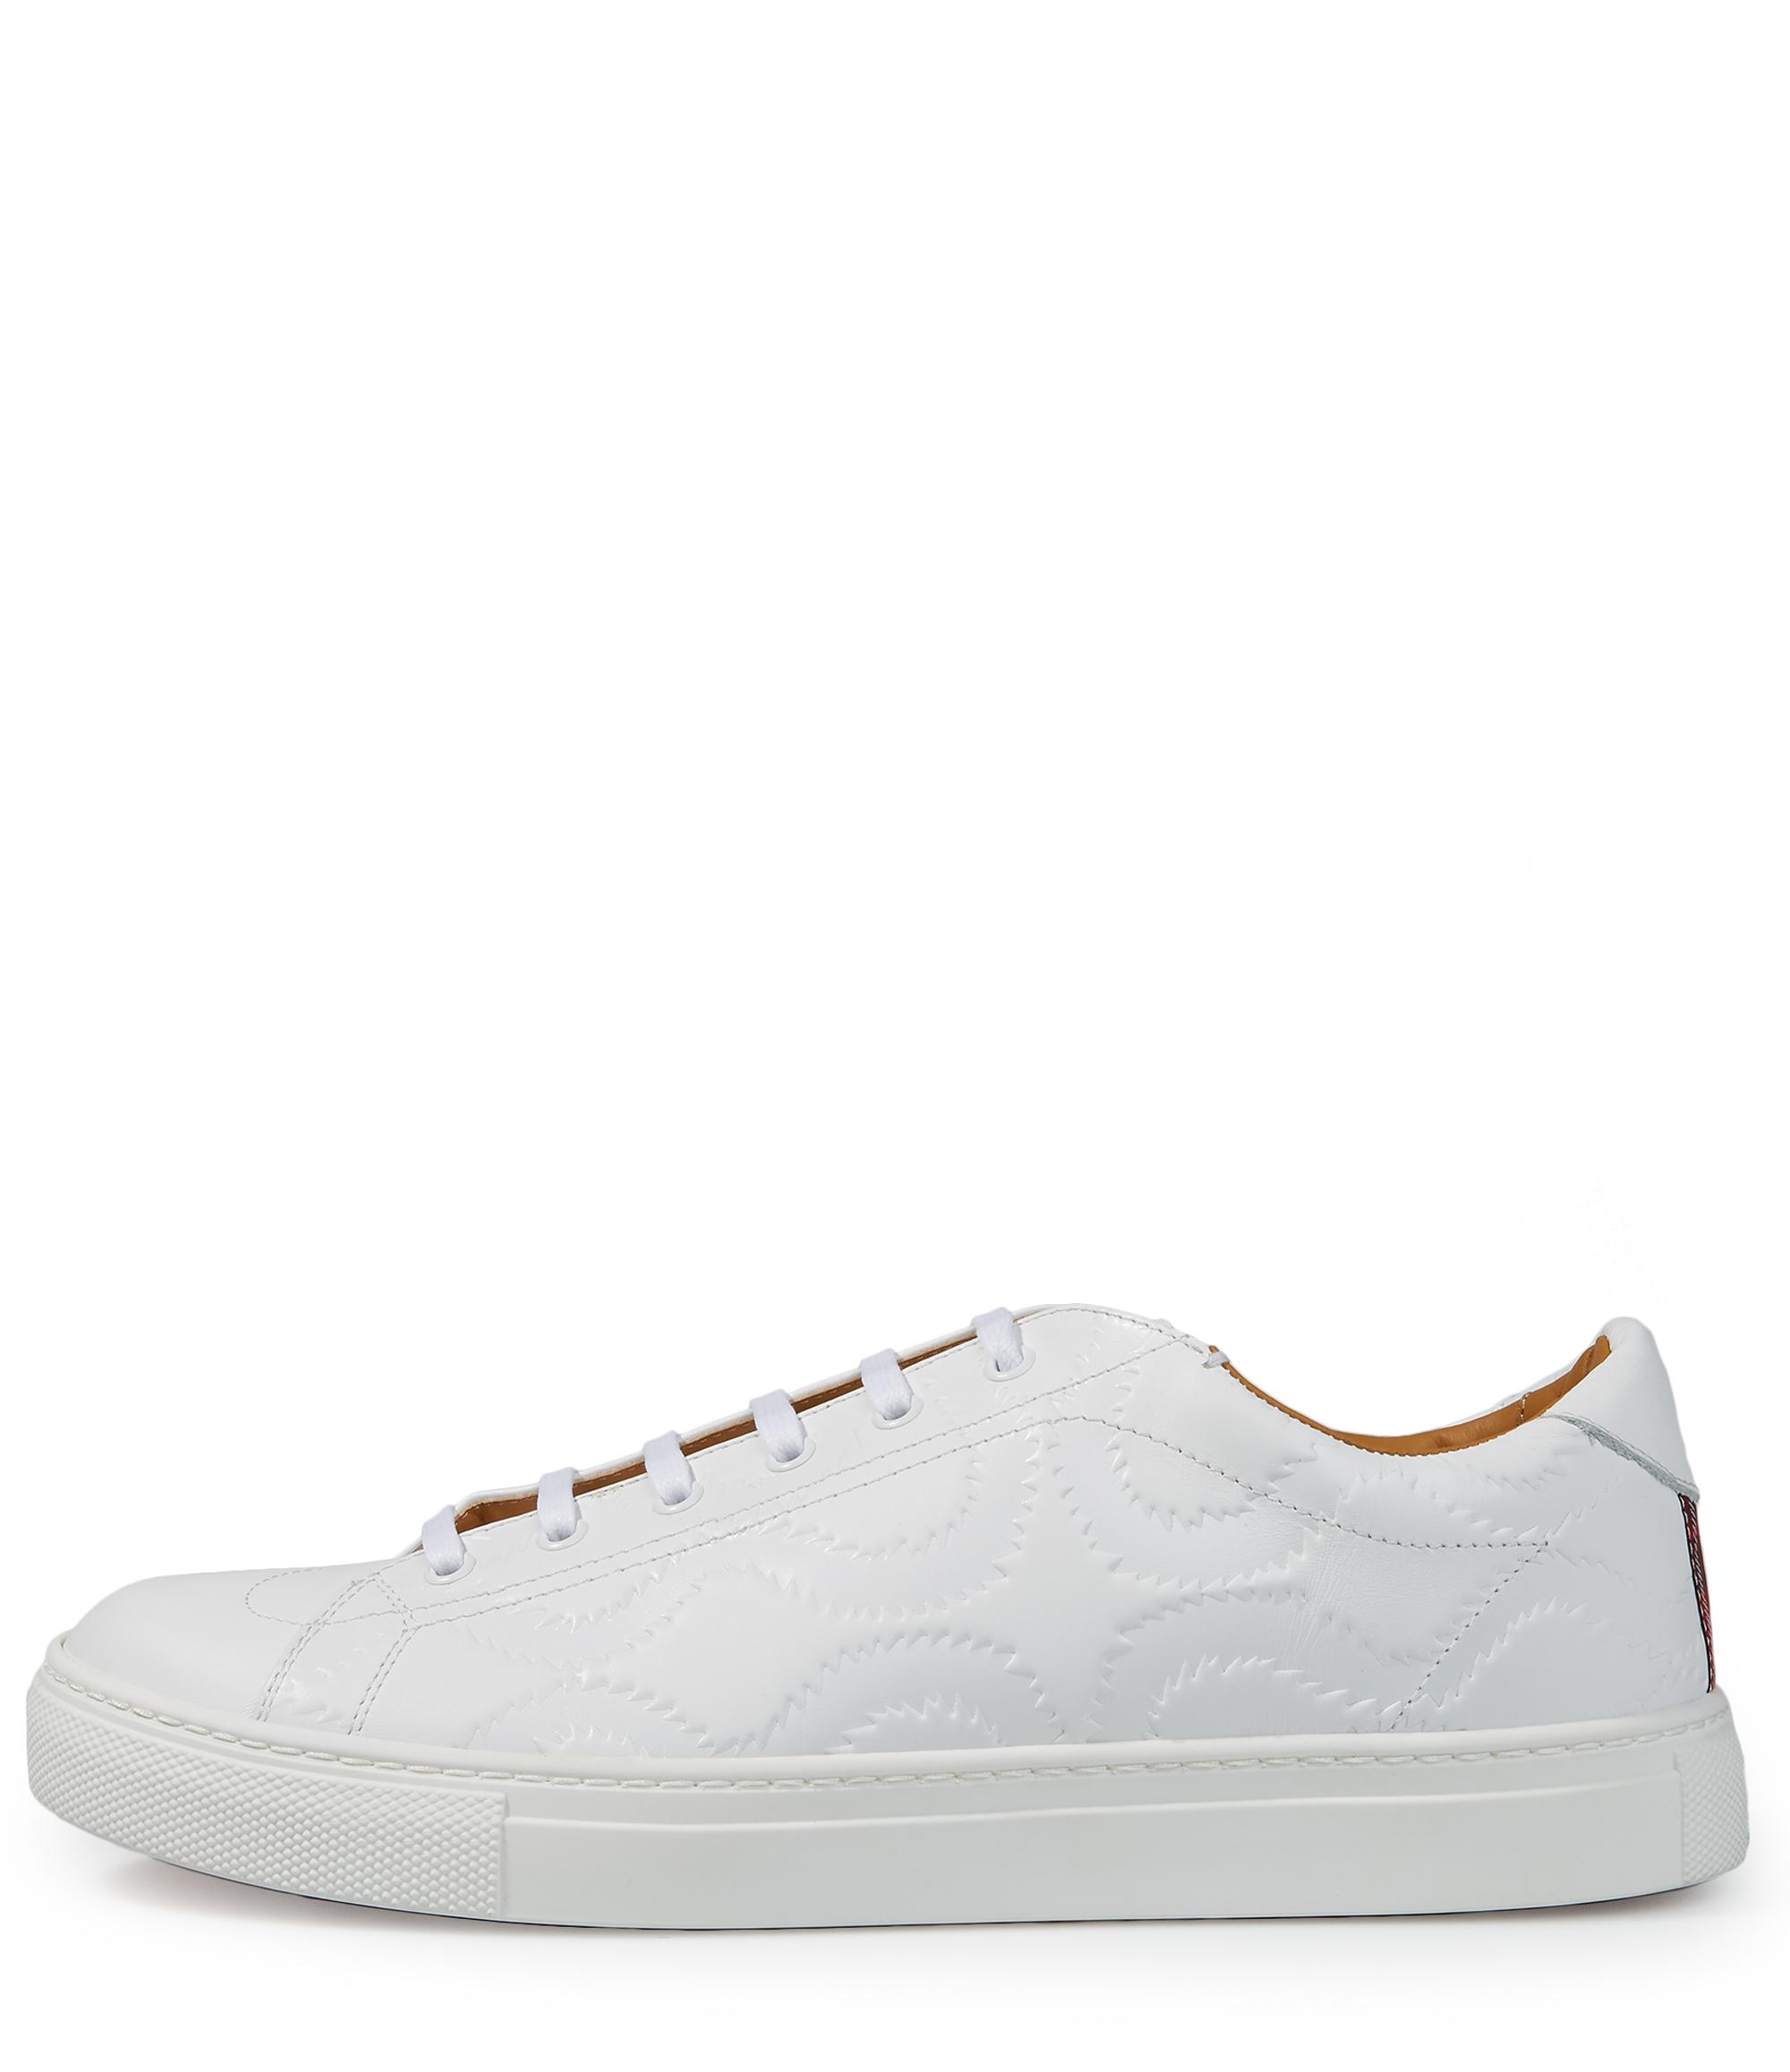 Lyst - Vivienne Westwood Derby Trainers White in White for Men